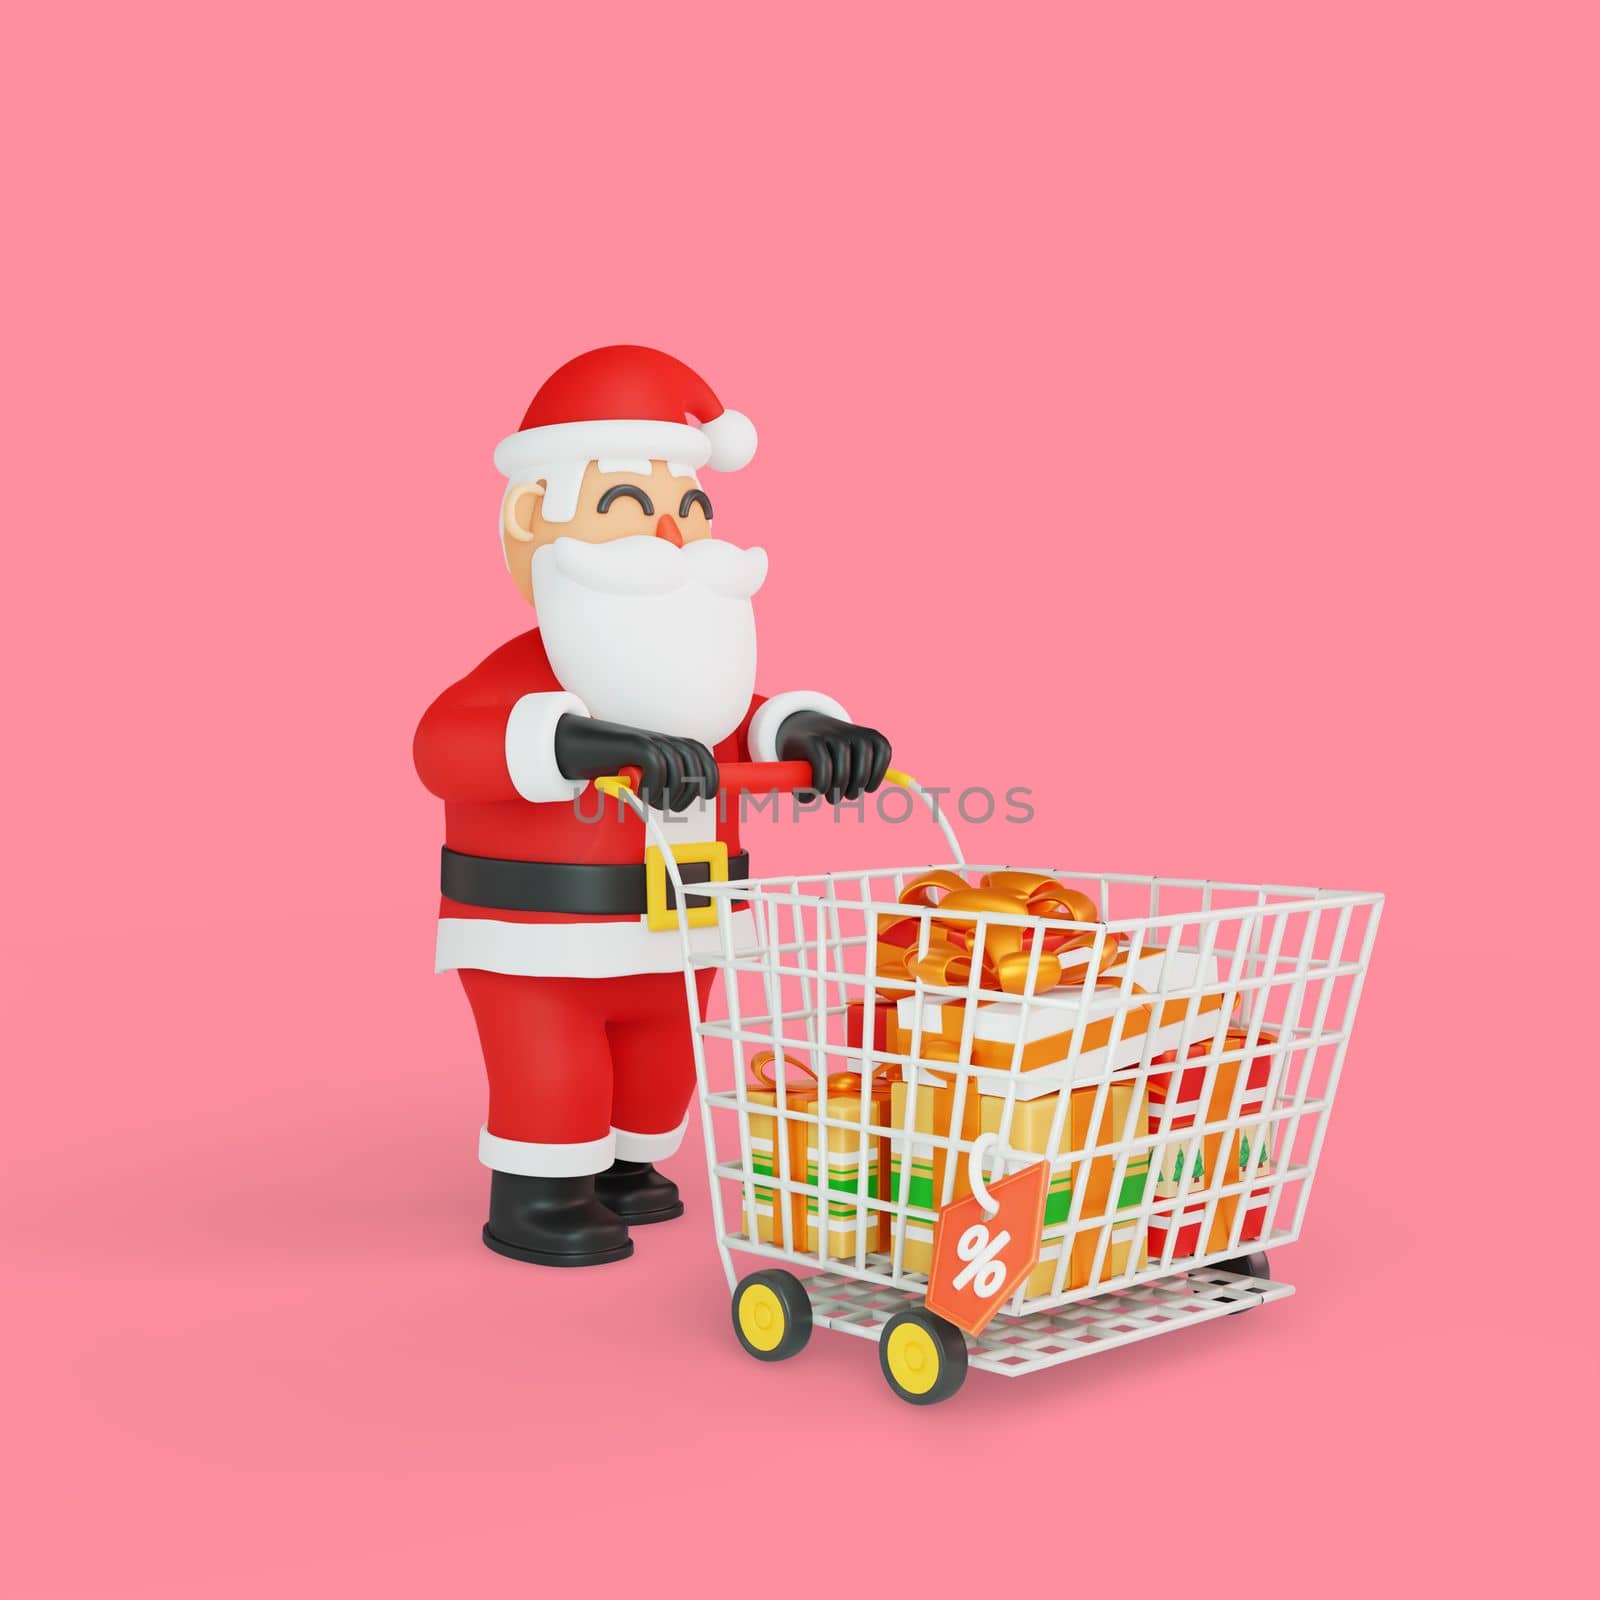 3d rendering of santa shopping for gifts on discount by Rahmat_Djayusman